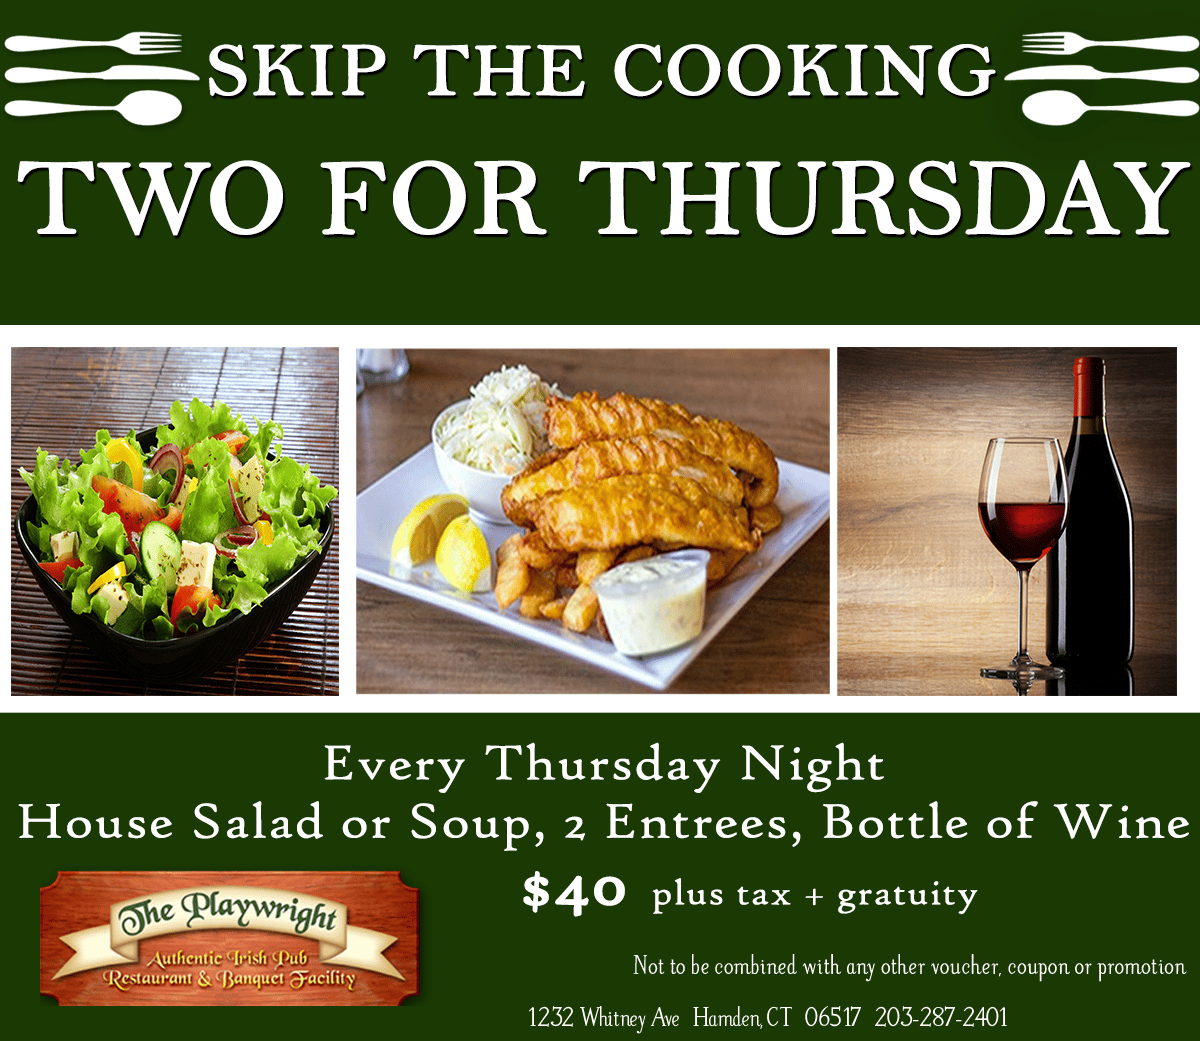 Skip the Cooking Two for Thursday $40 + tax and gratuity